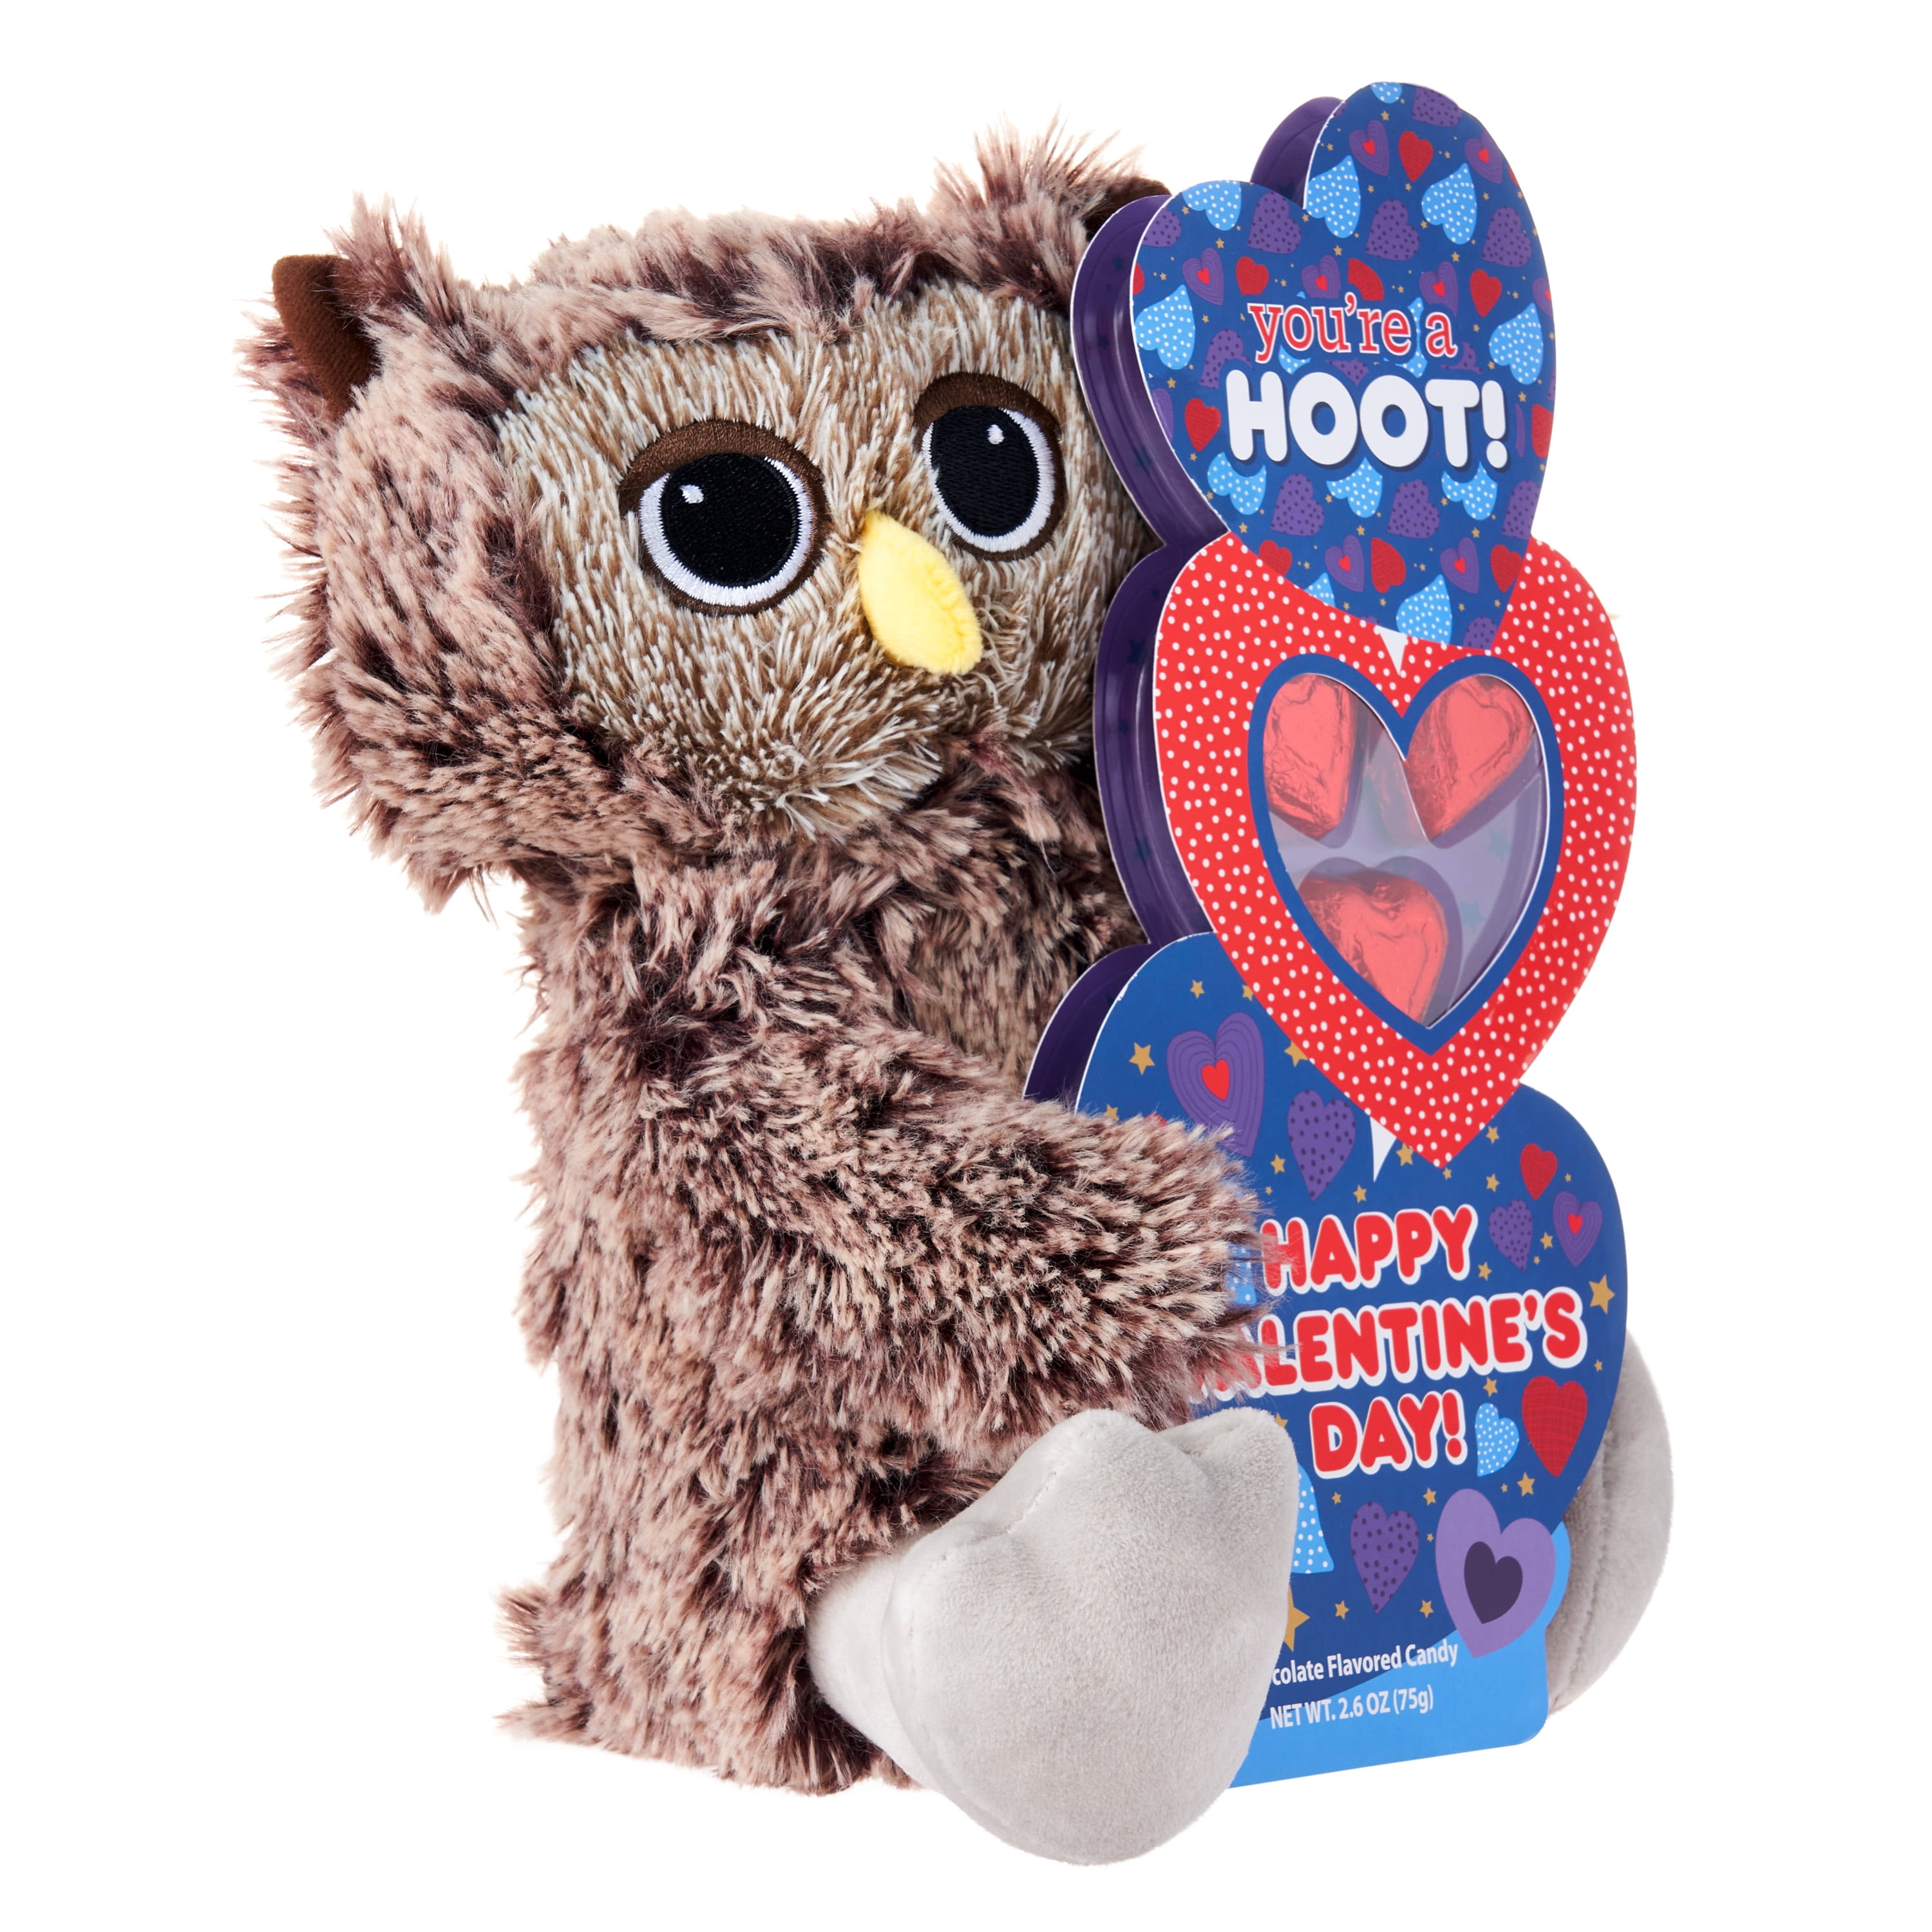 441263 Way to Celebrate! Progressive Gifts 9.5" Valentine's Day Plush Owl with Candy Gift Set.